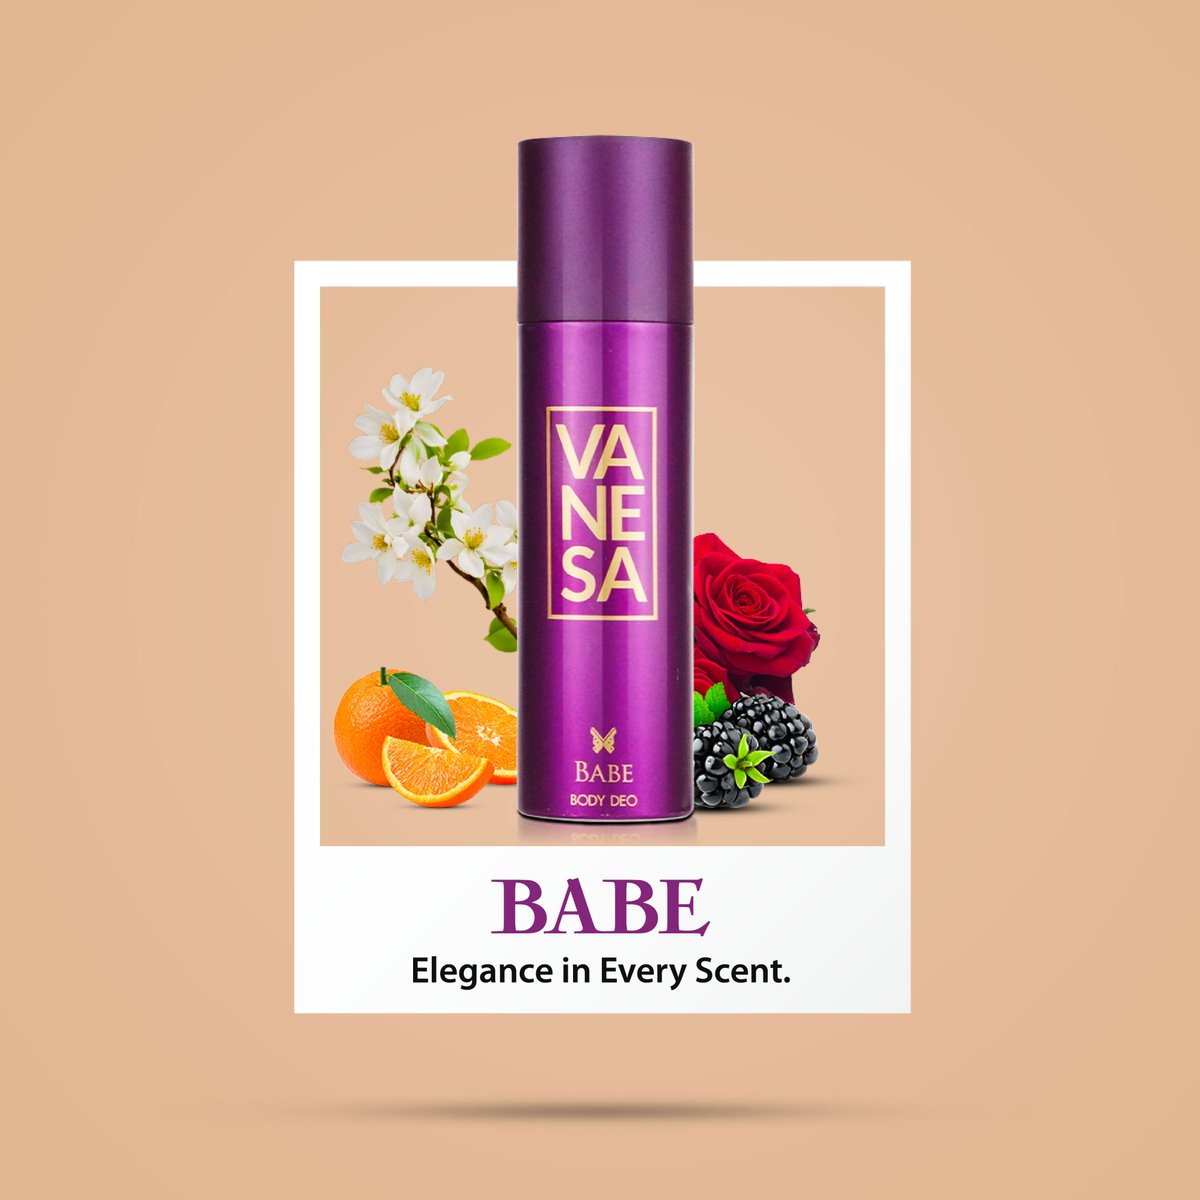 That's 'Babe' for you! Elevate your fragrance game with a touch of elegance that turns heads and leaves a lasting impression! #LoveYourSelfLoveVanesa #vanesabeauty #vanesabodydeo #Vanesa #Babe #VanesaBabe #Fragrance #BodyDeo #deodorant #Skin #beauty #woman #Perfume #Deodrants